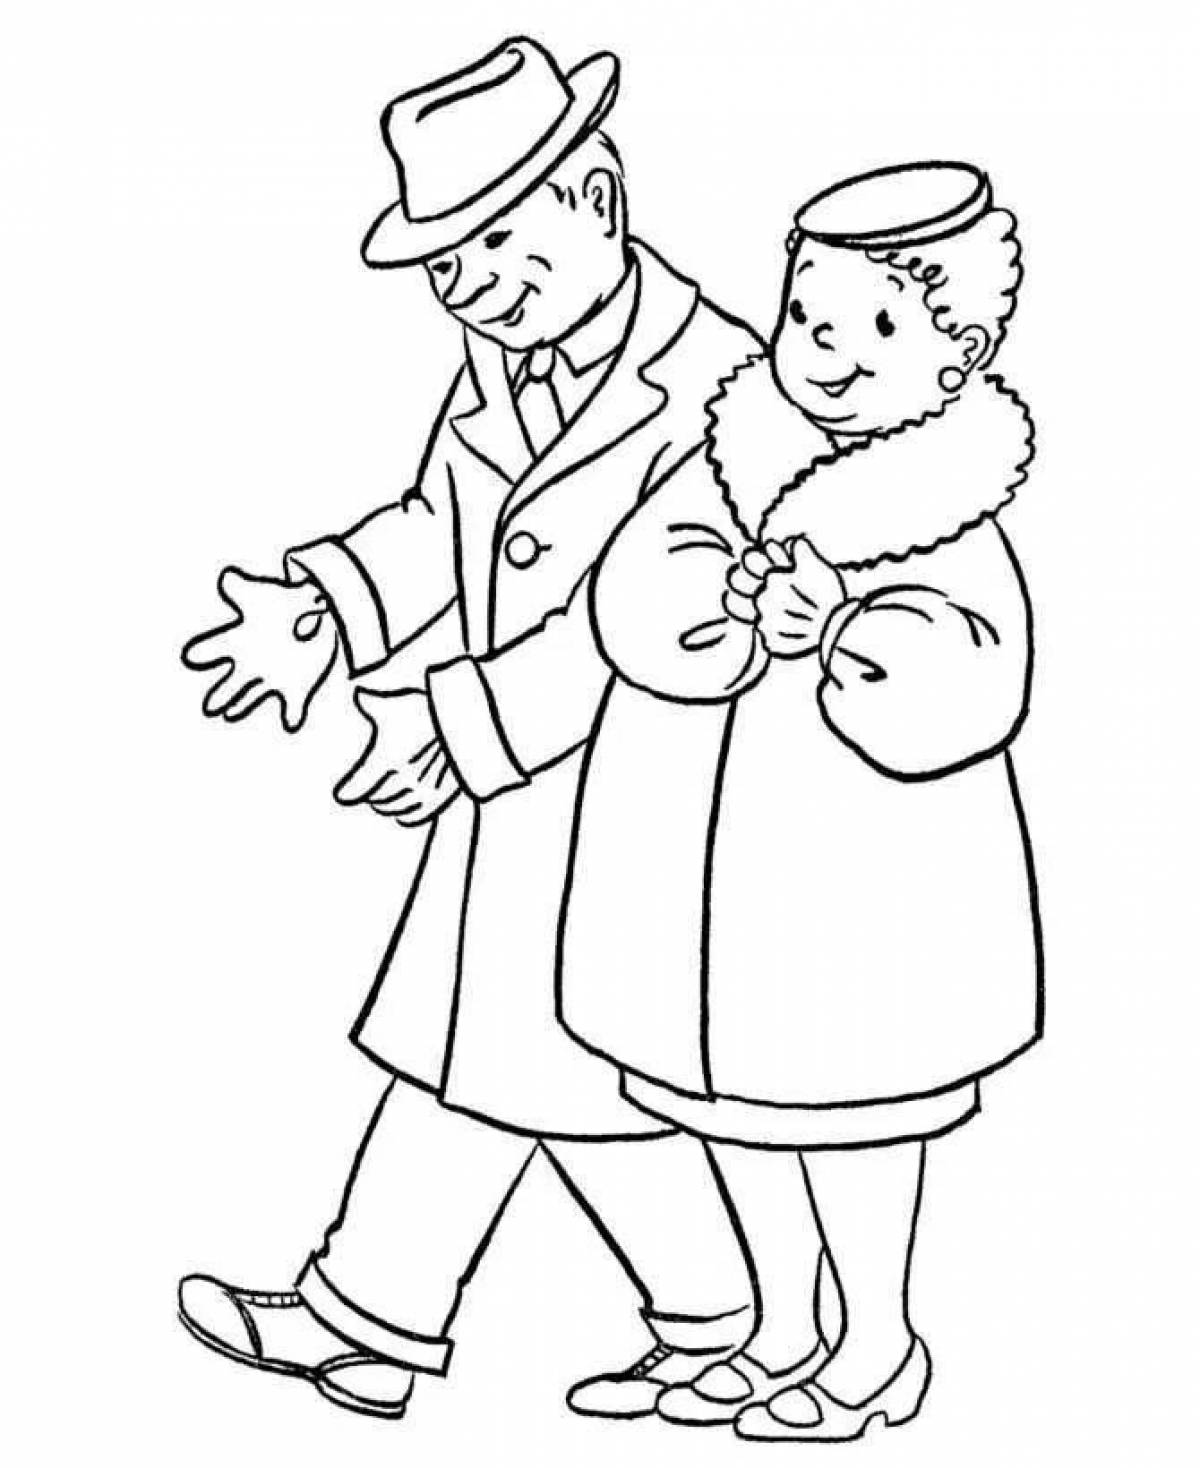 Adorable old people coloring book